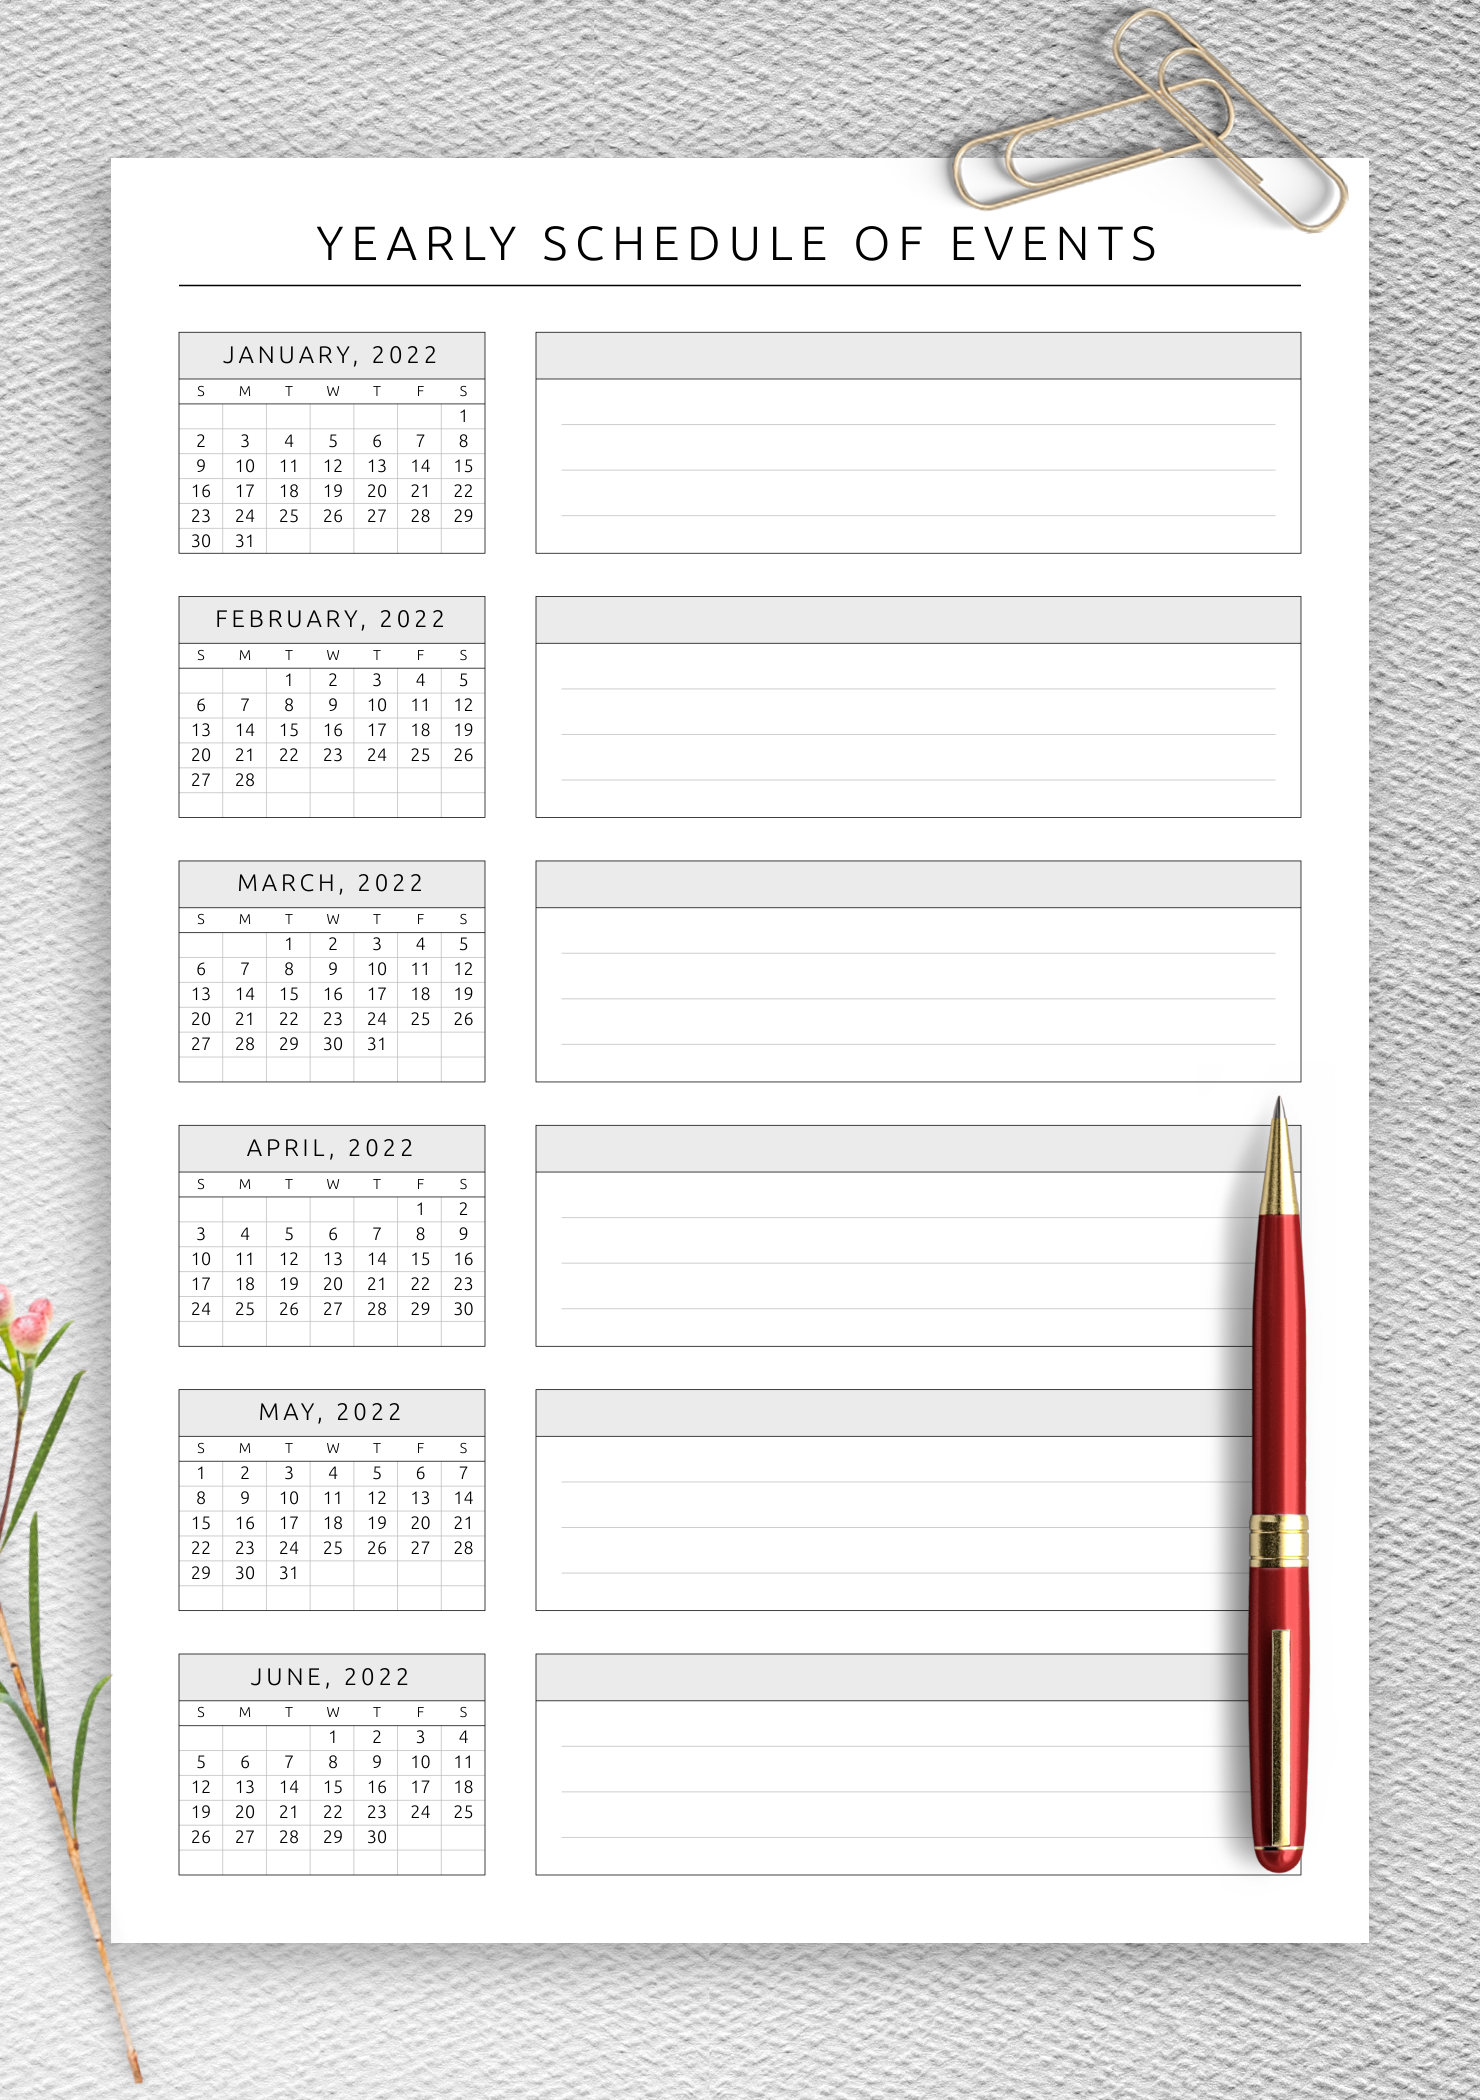 Event Planner Template